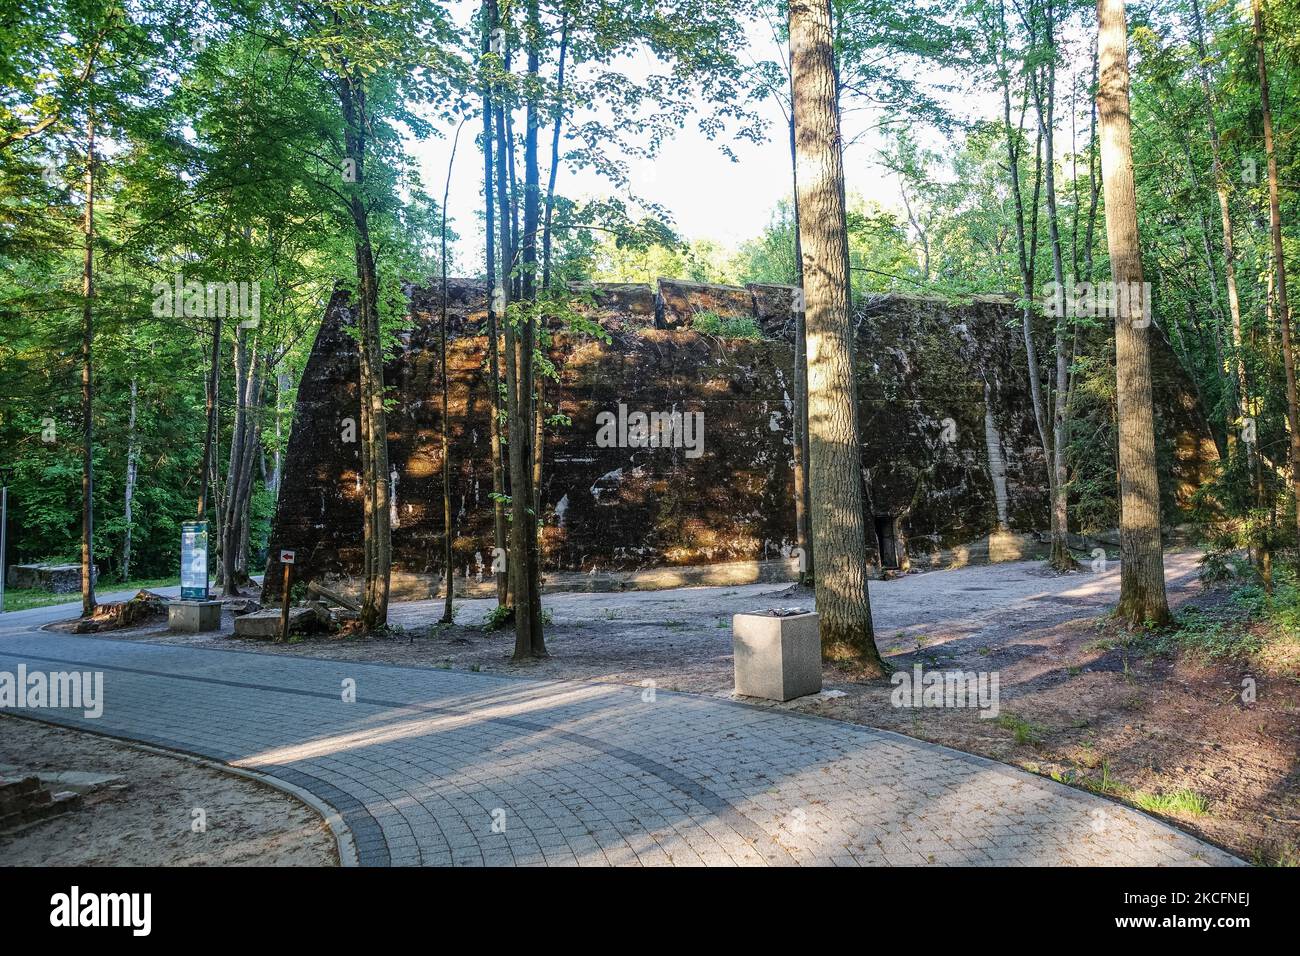 People visiting the WWII era Adolf Hitler's quarters hidden in a forest near Gierloz, Poland, are seen on 2 June 2021 r Wolf's Lair (ger. Wolfsschanze) ruins of Adolf Hilter's war headquarters was a hidden town in the woods consisting of 200 buildings: shelters, barracks, 2 airports, a power station, a railway station, air-conditioners, water supplies, heat-generating plants and two teleprinters (Photo by Michal Fludra/NurPhoto) Stock Photo